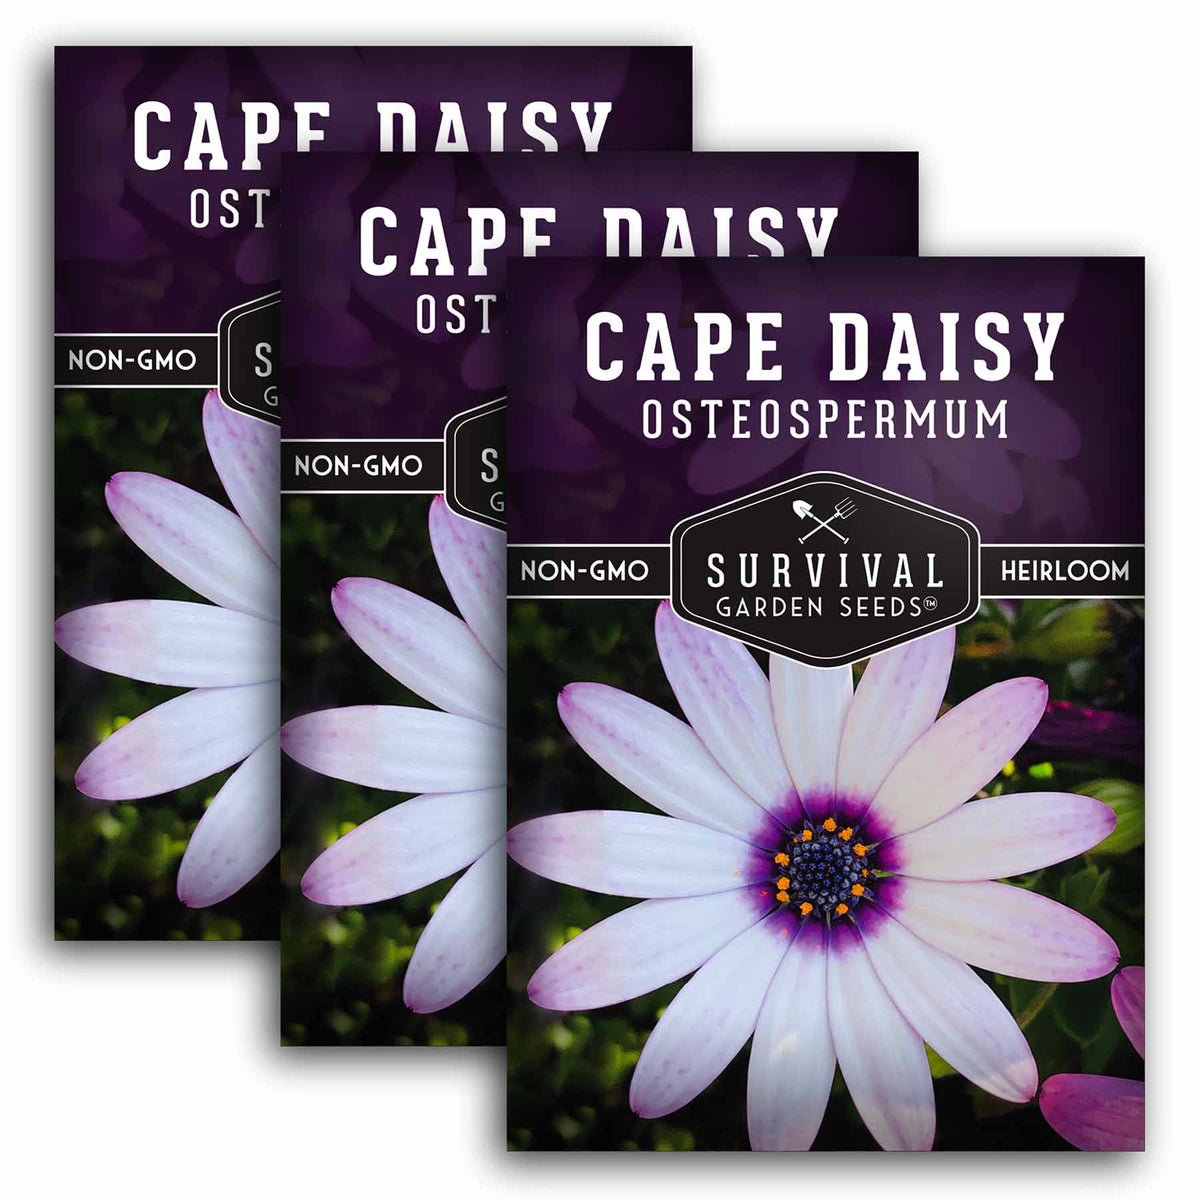 3 packets of Cape Daisy seeds